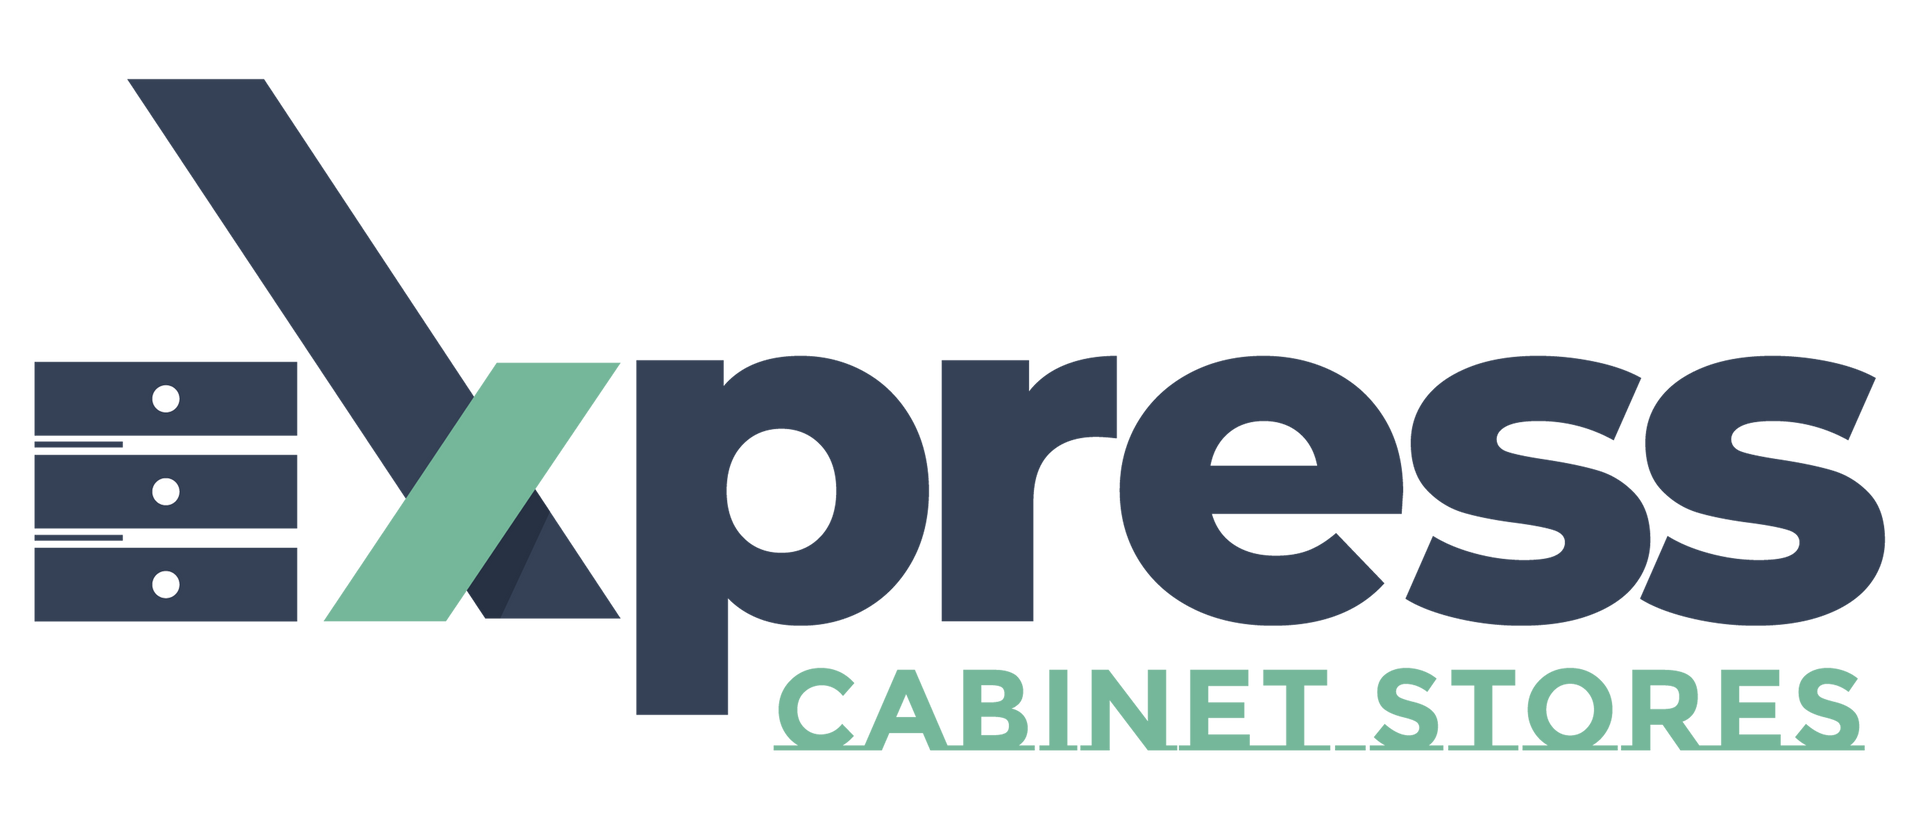 Express Cabinet Stores logo